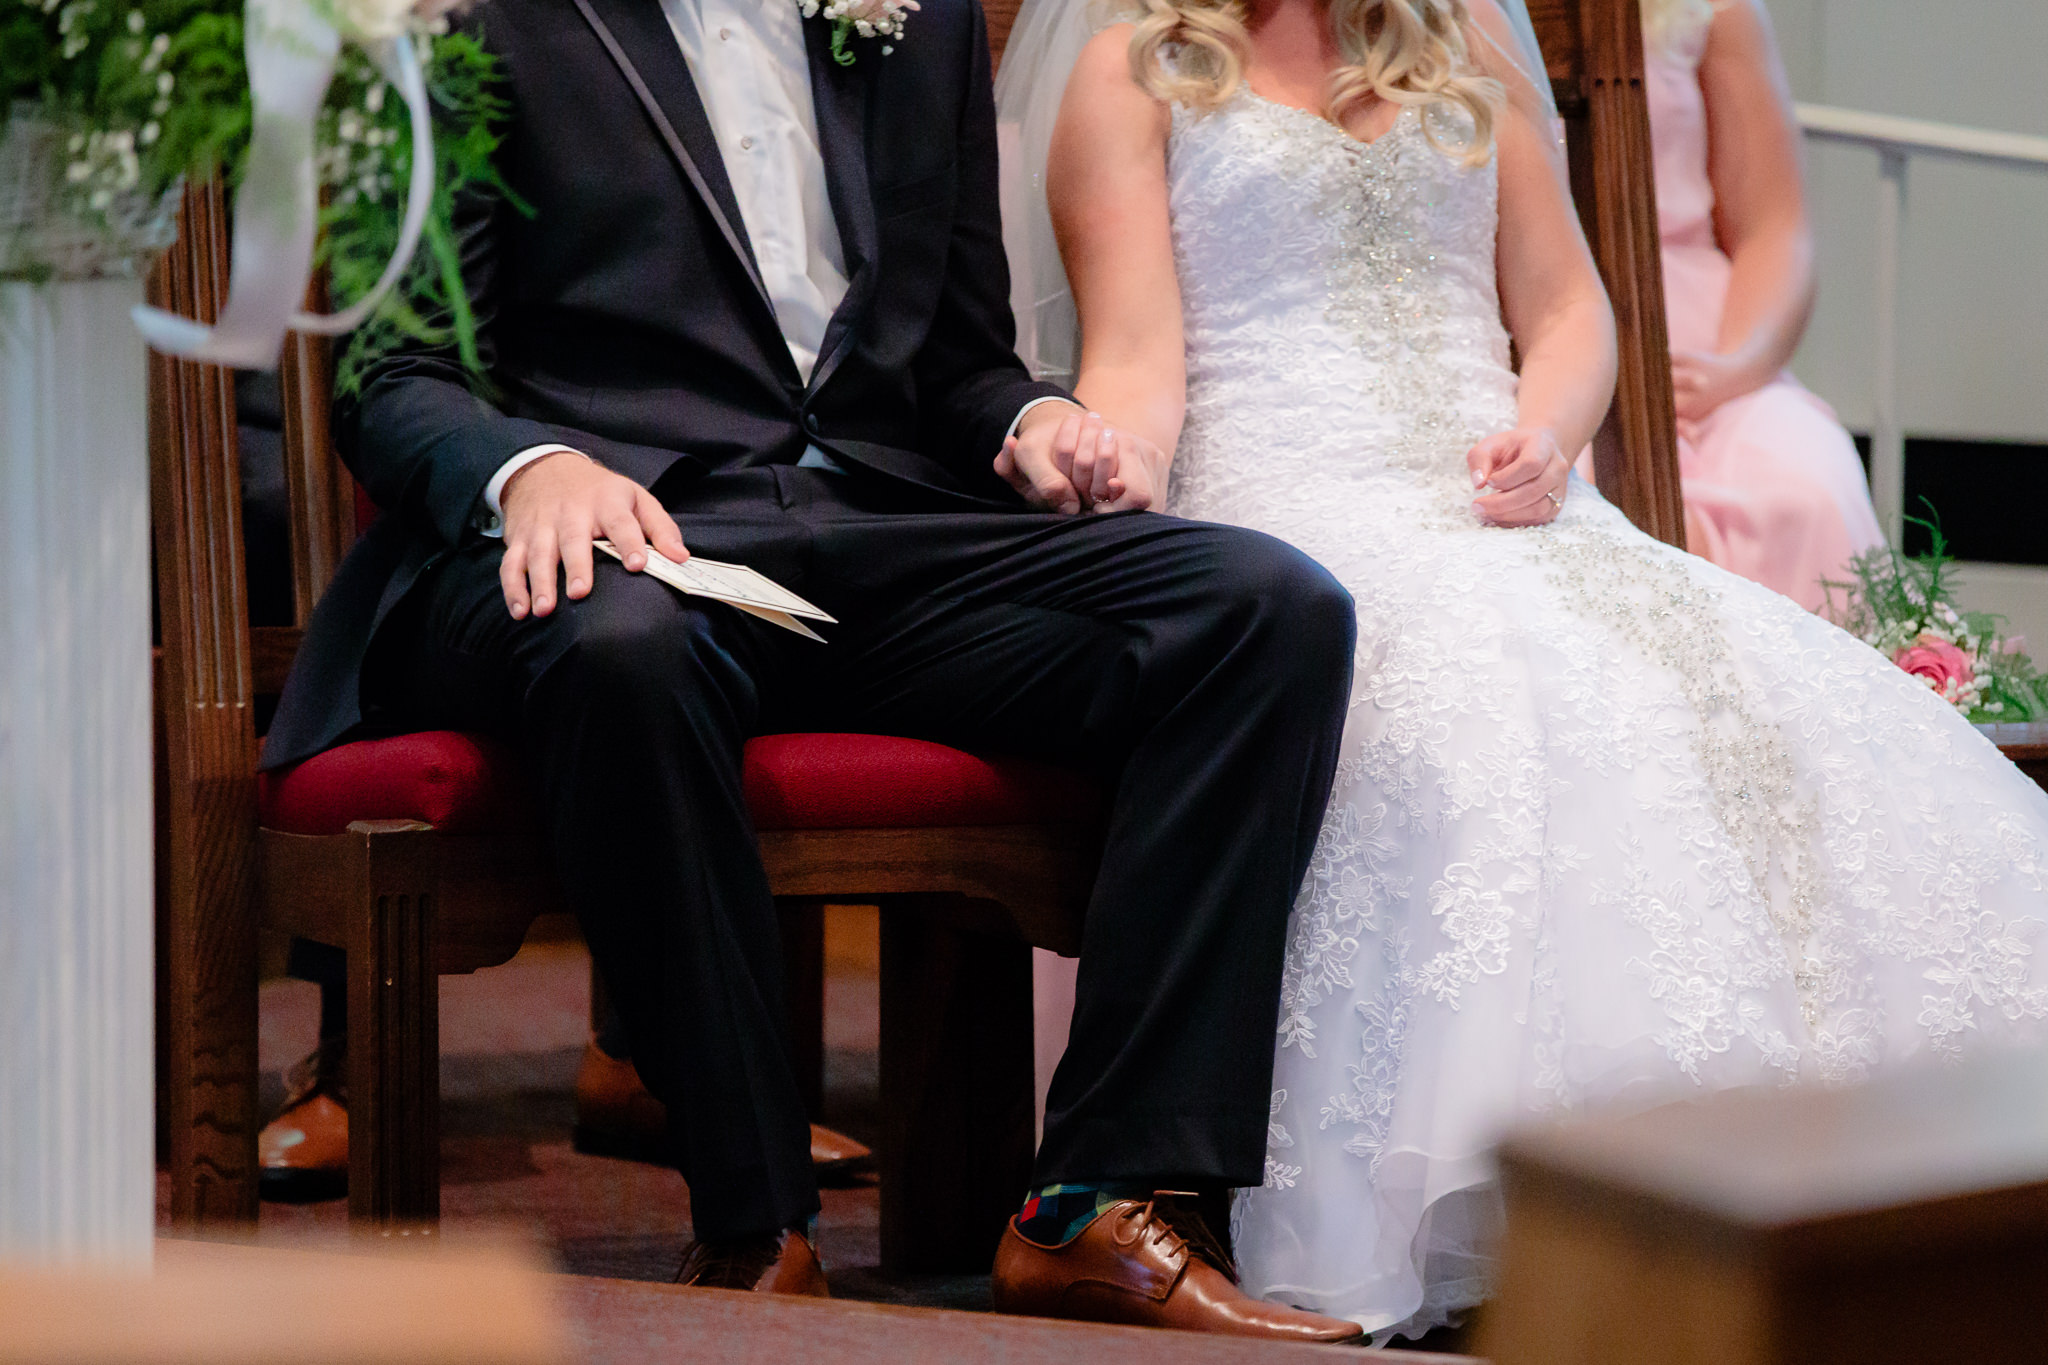 Bride & groom hold hands during their ceremony at Duquesne University's Chapel of the Holy Spirit